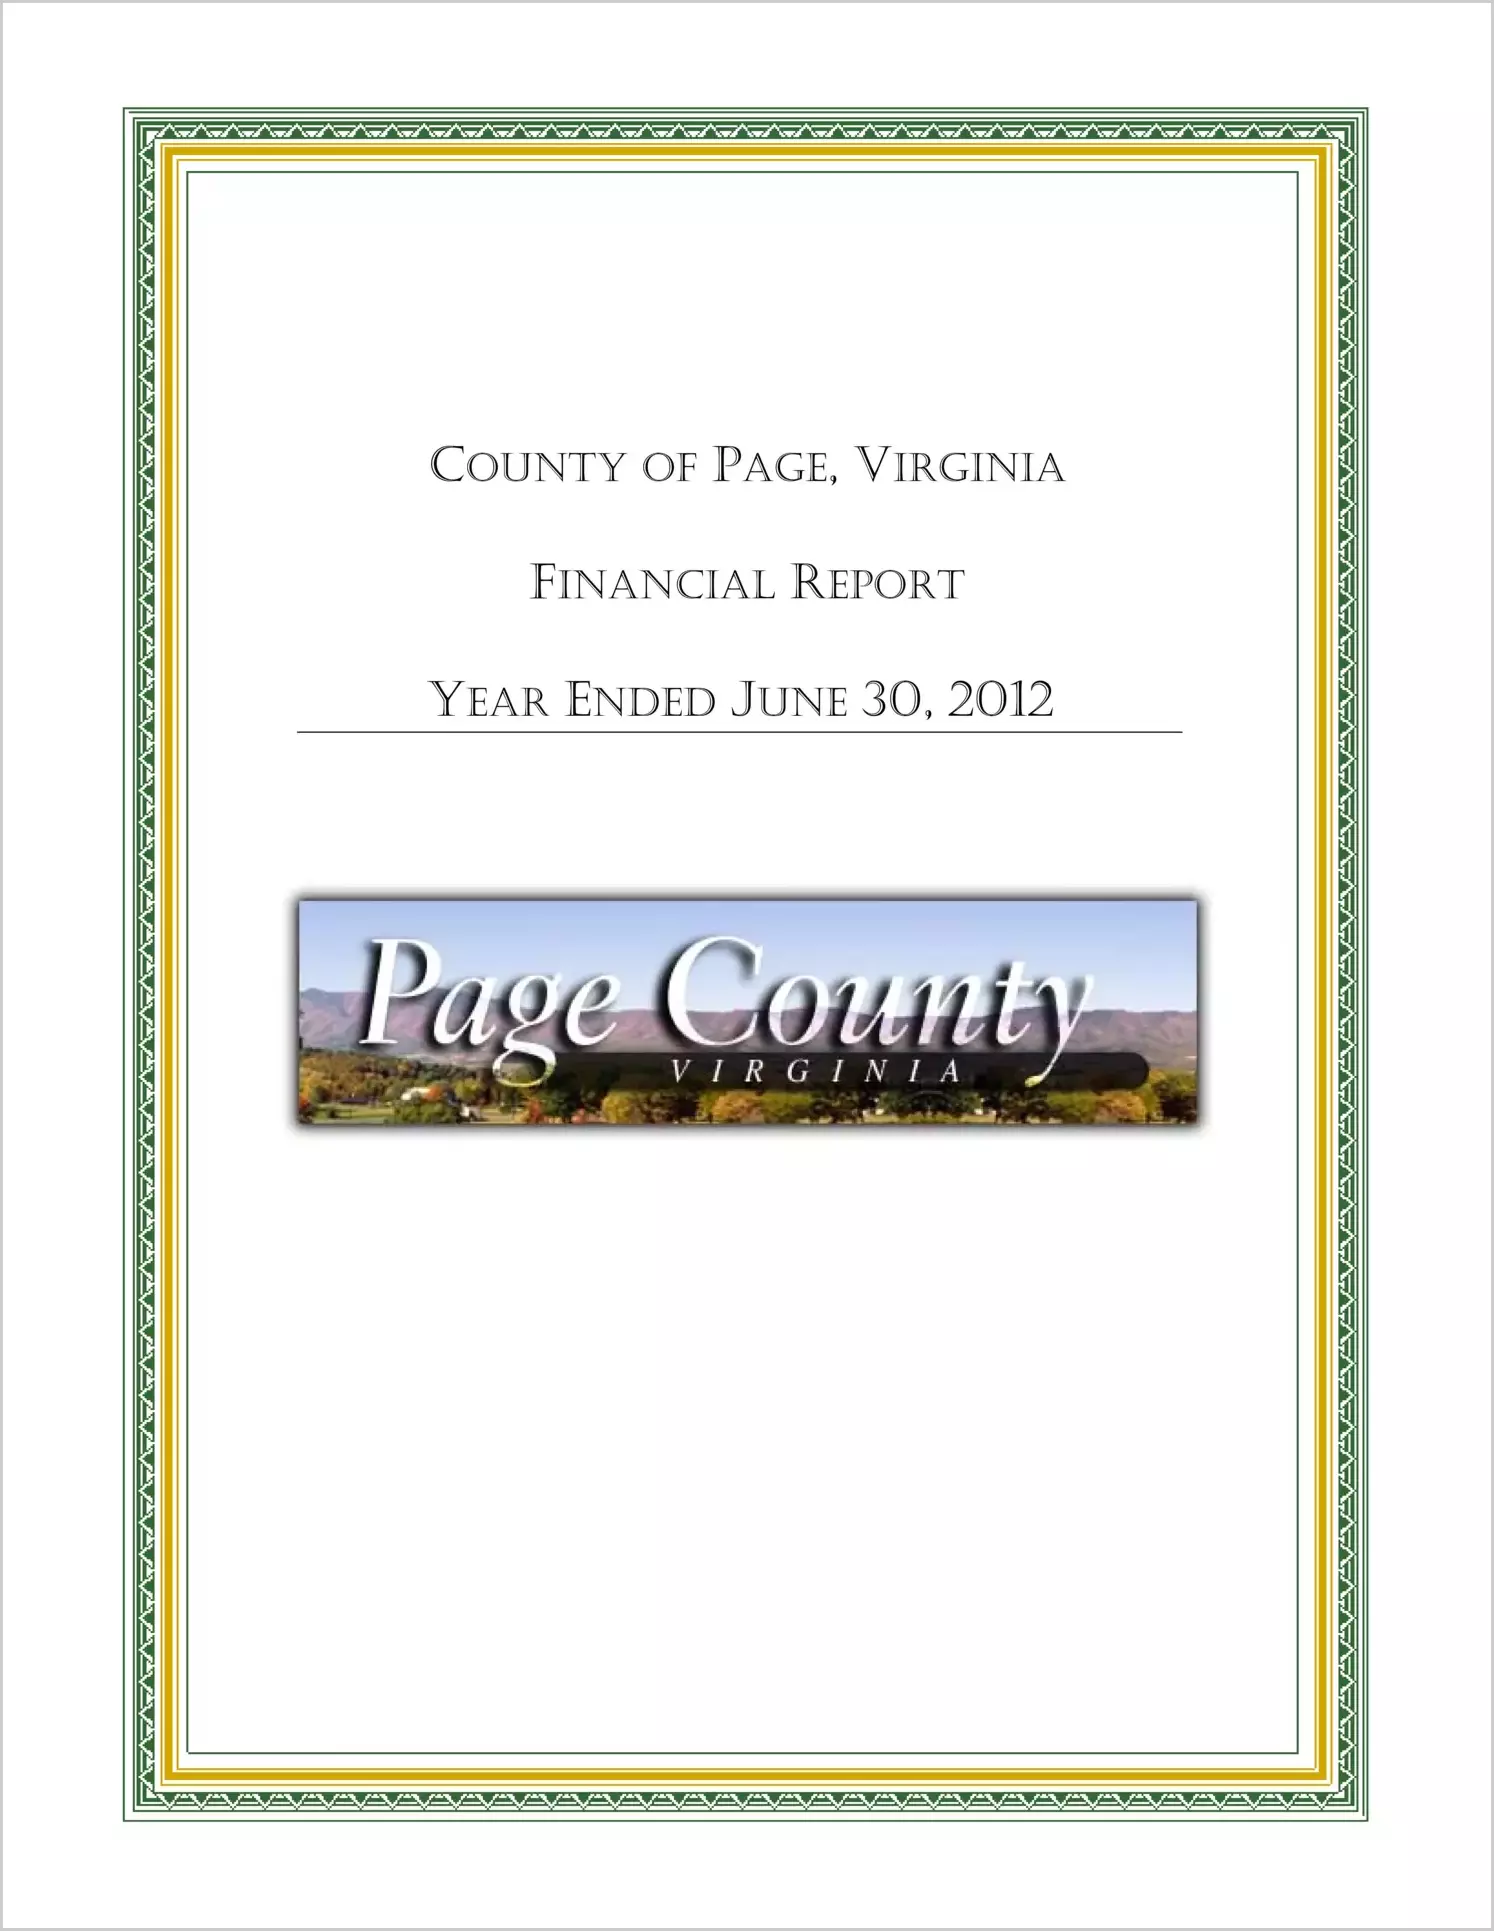 2012 Annual Financial Report for County of Page